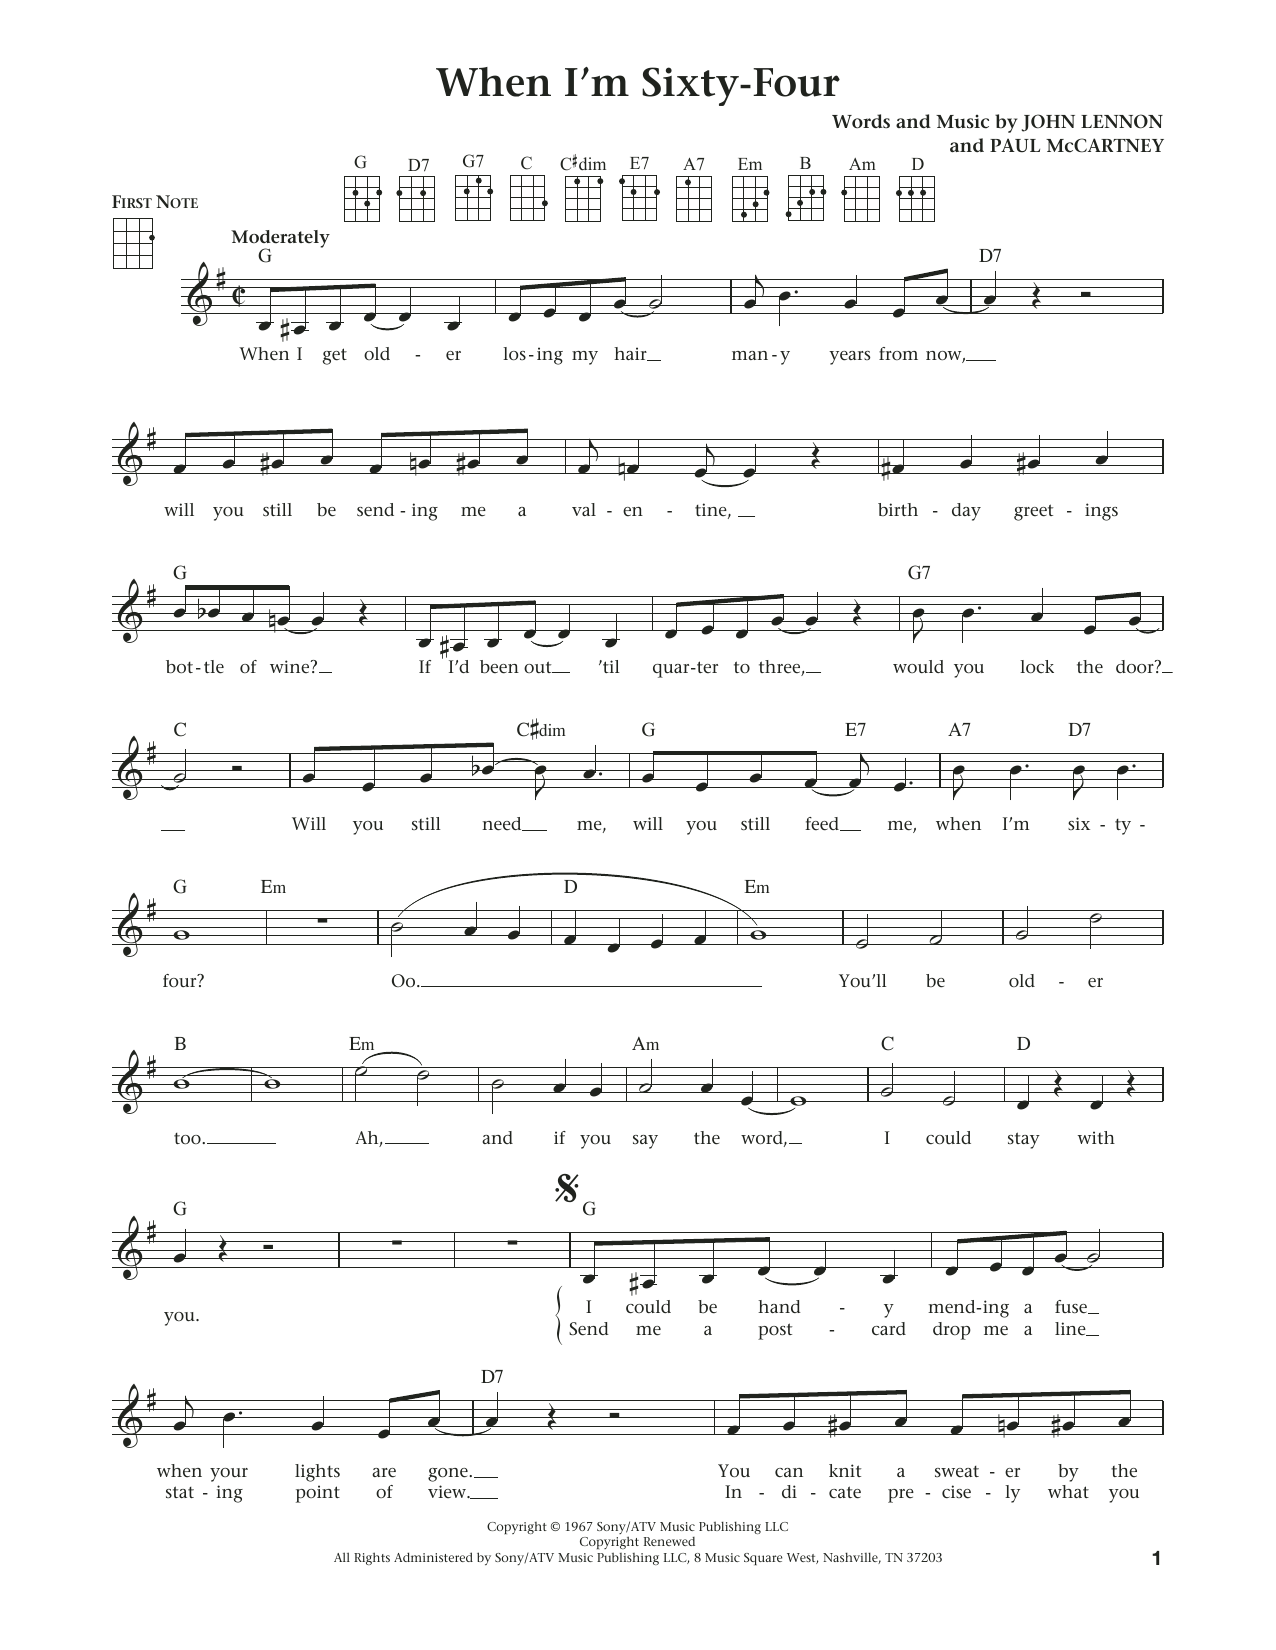 Download The Beatles When I'm Sixty-Four (from The Daily Uku Sheet Music